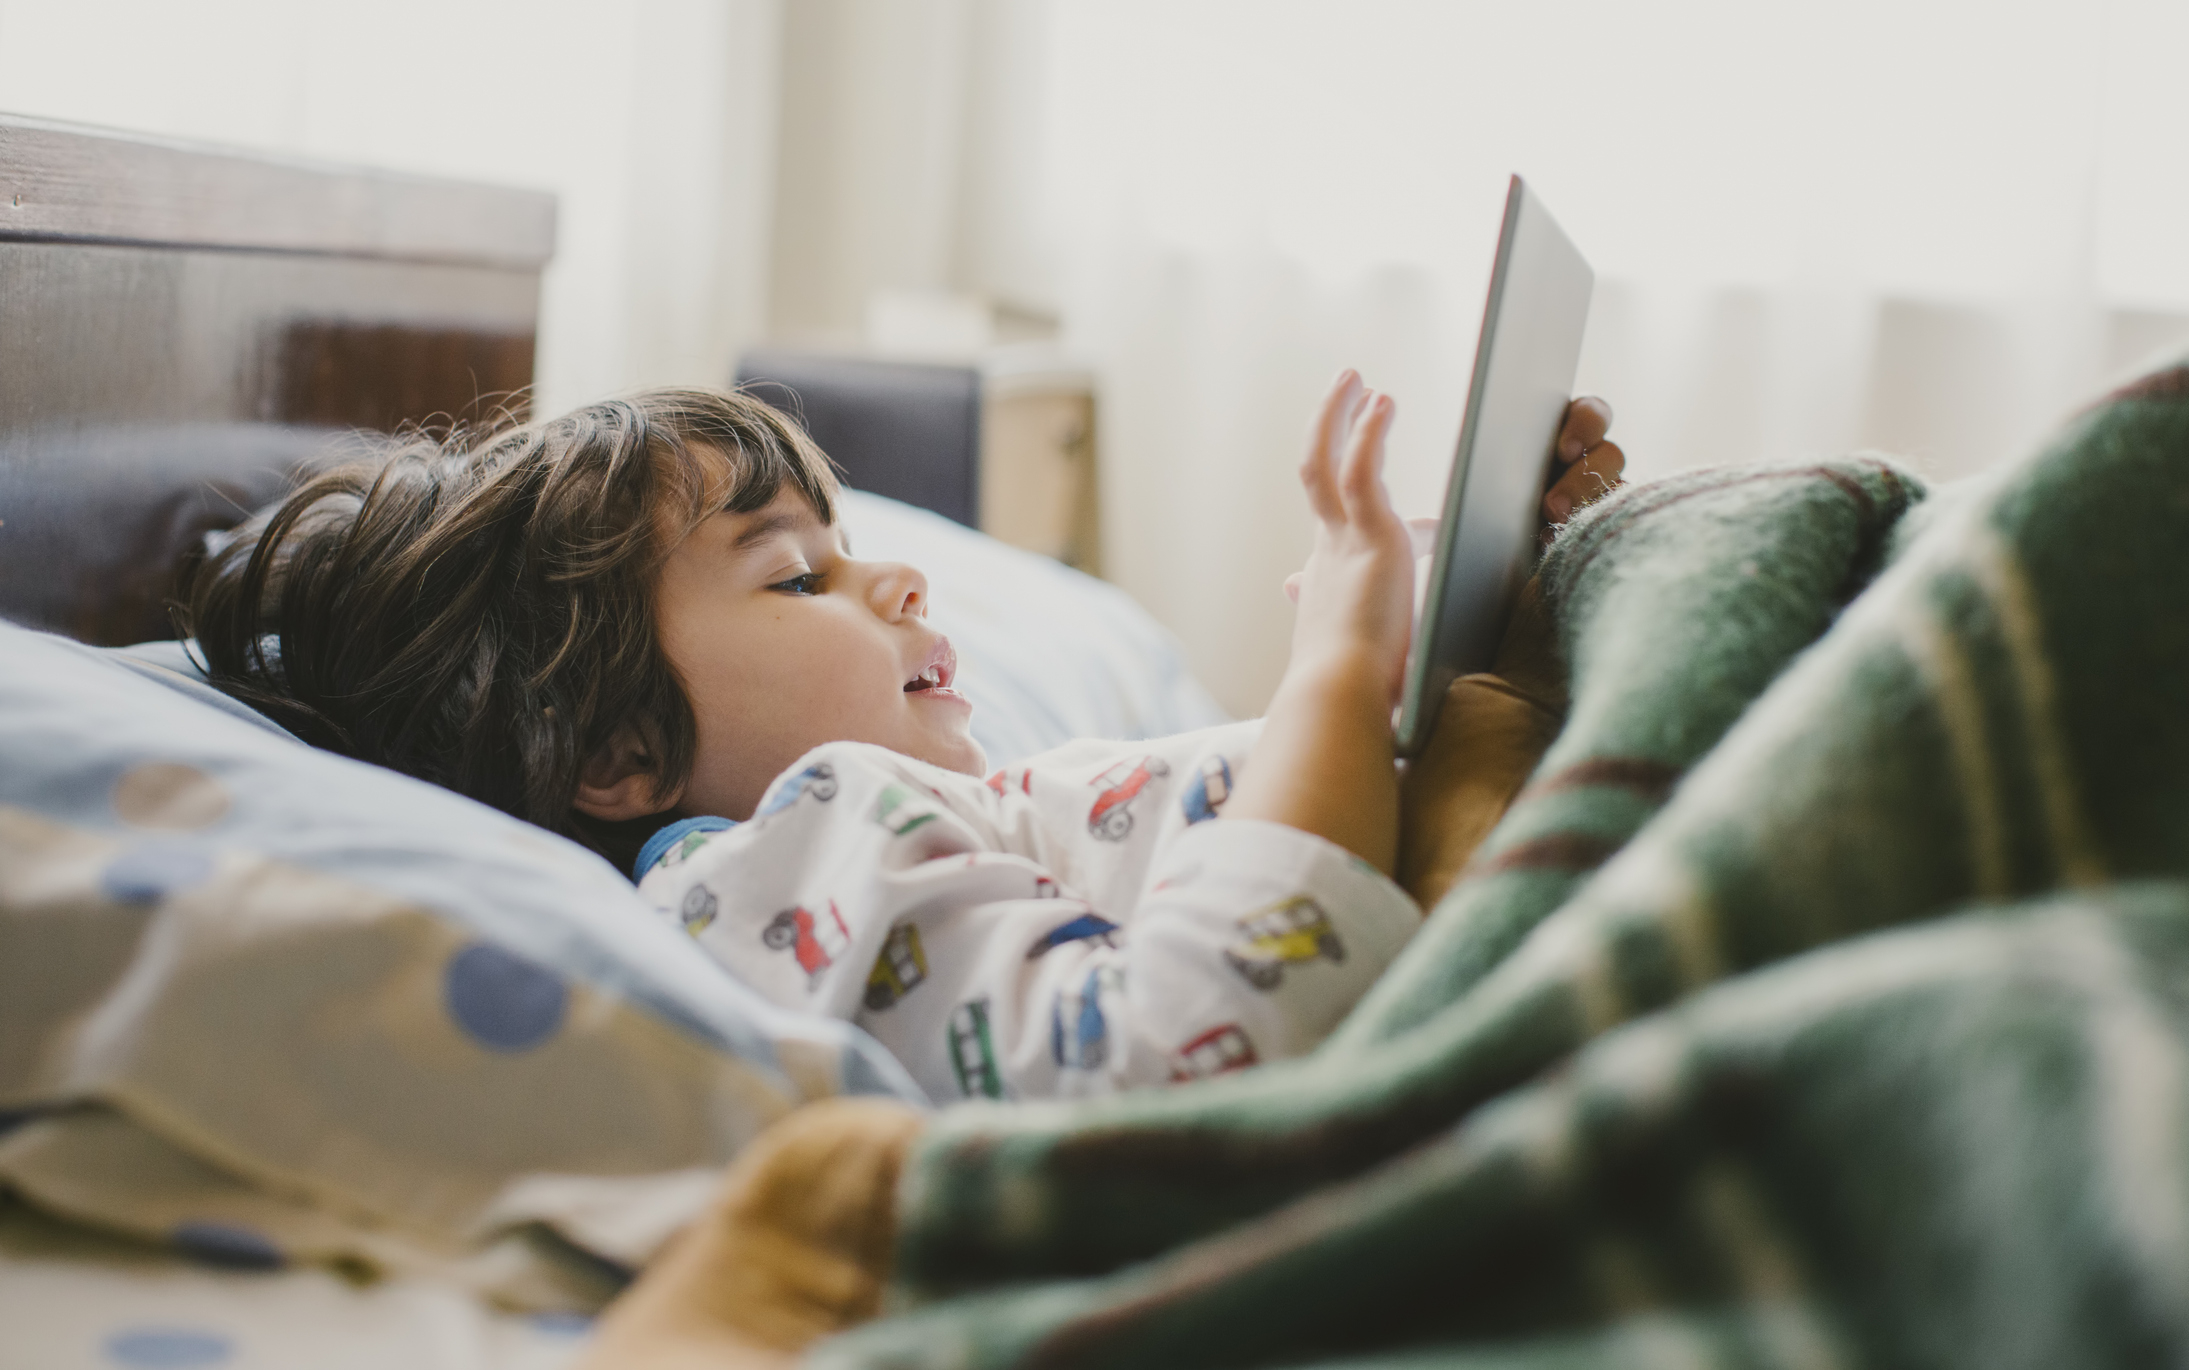 Child lying in bed holding a tablet with a joyful expression